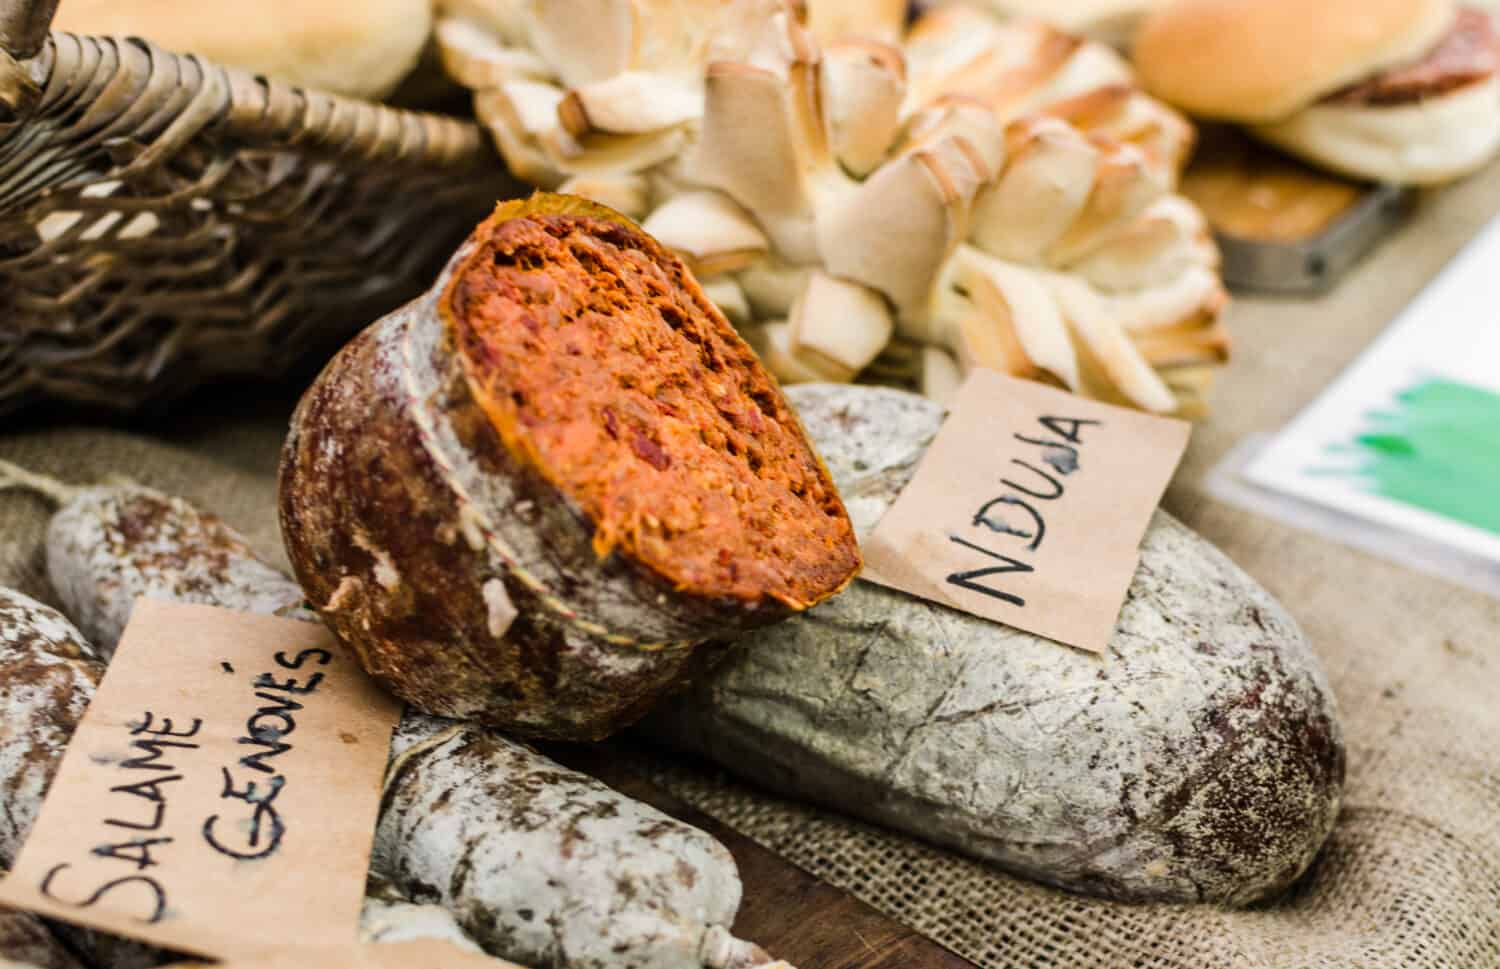 Nduja, a spicy spreadable sausage from the south of Italy